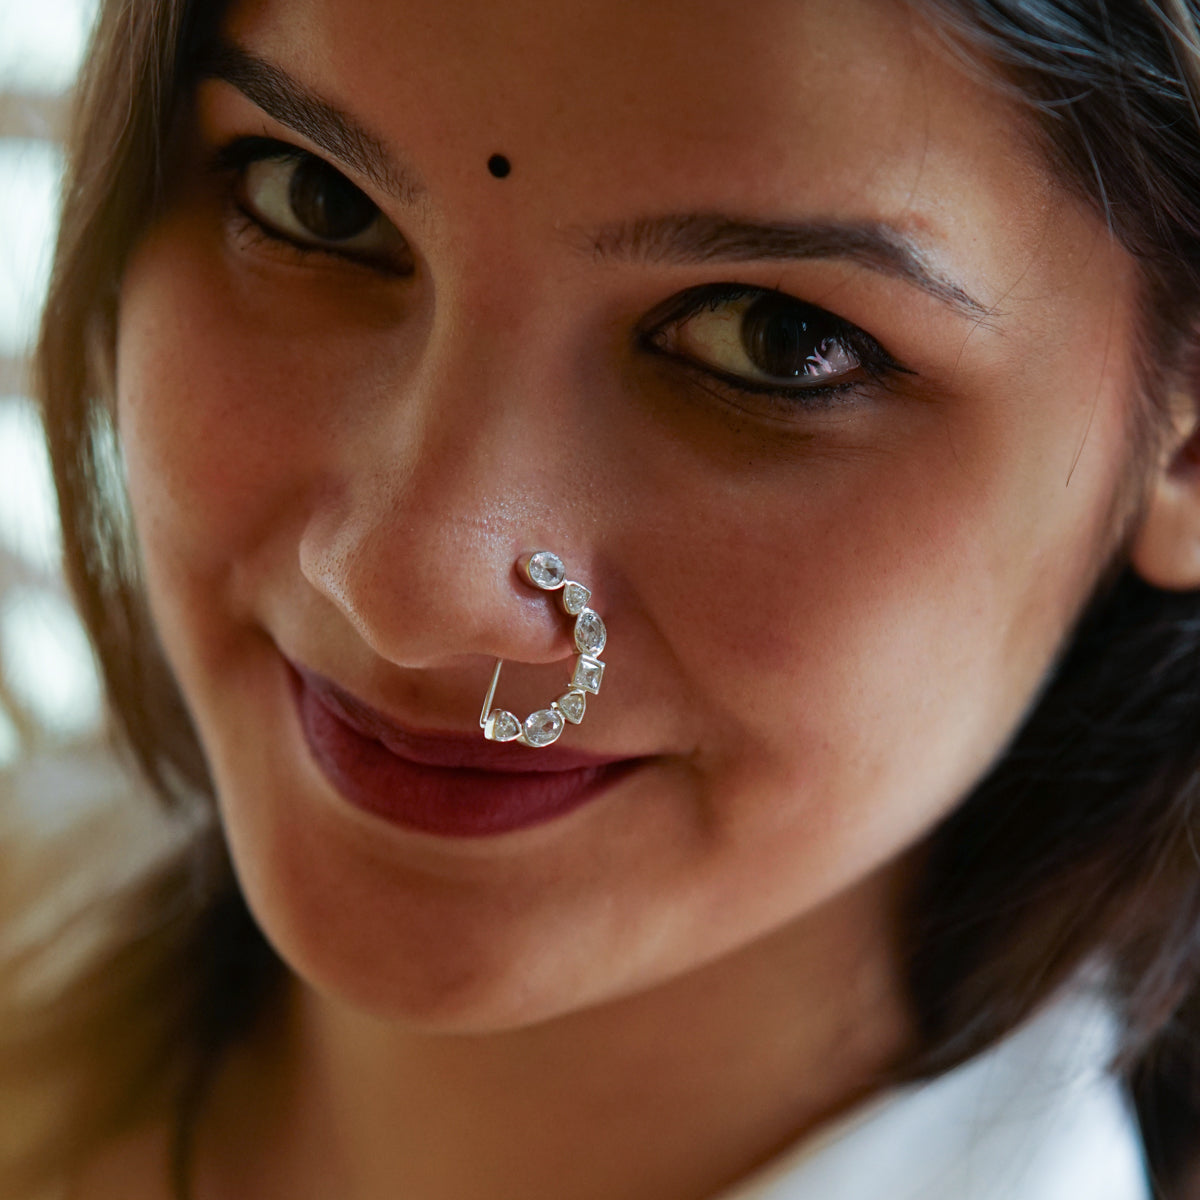 a woman with a nose ring and a nose piercing